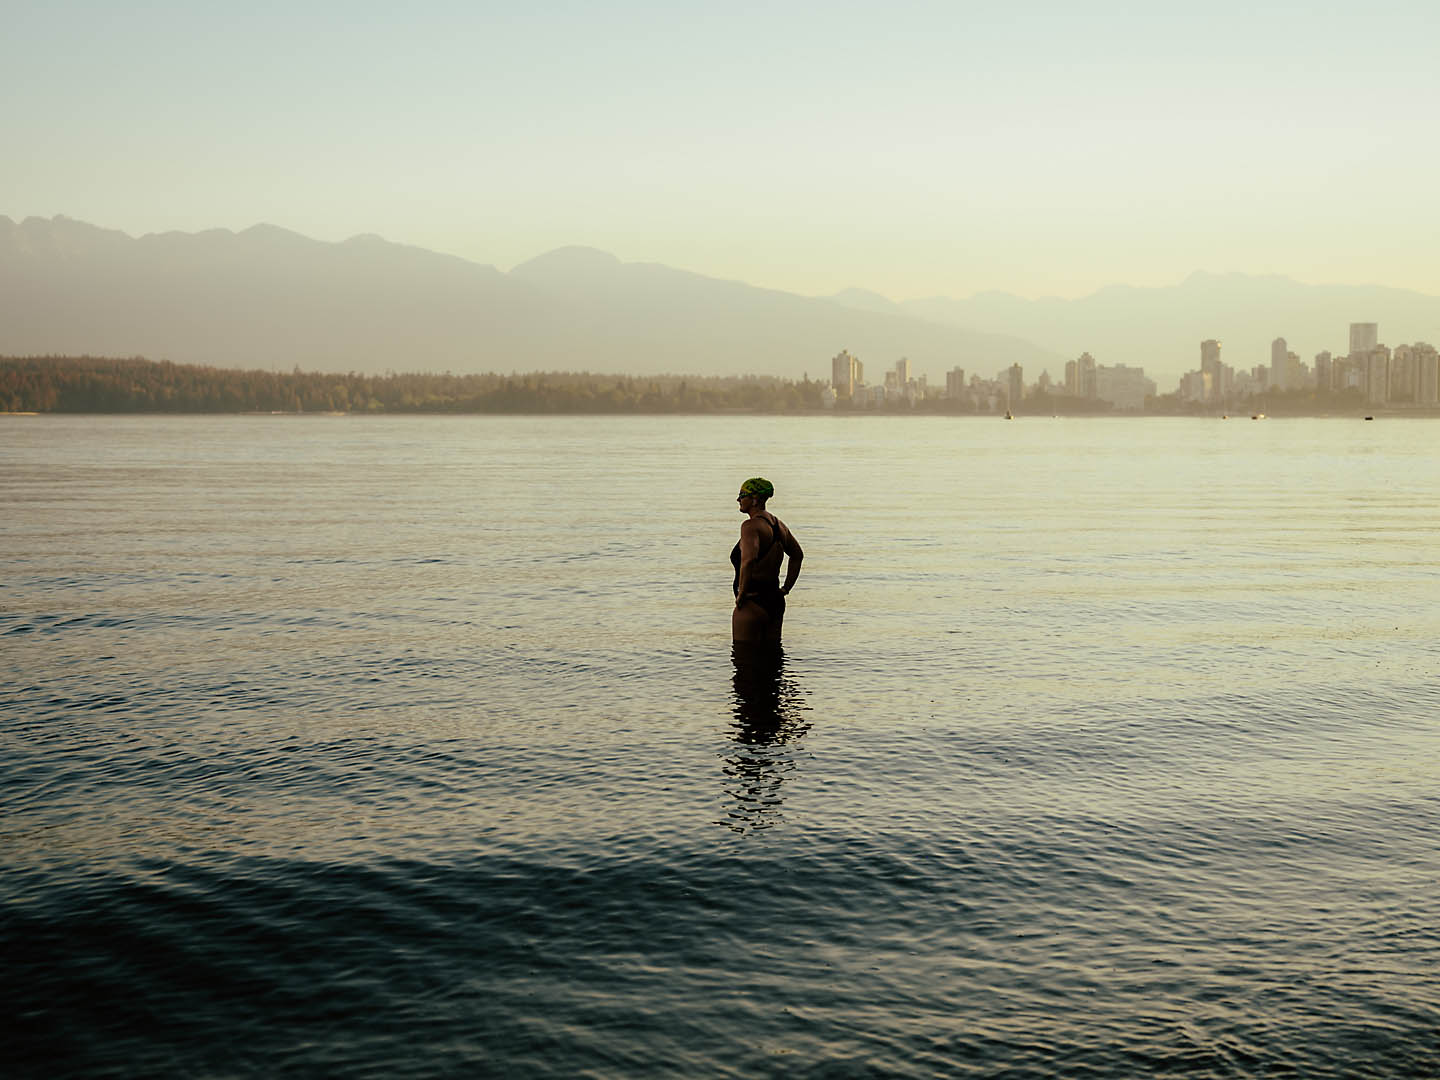 Jessi Harewicz standing in the ocean with the city in the background